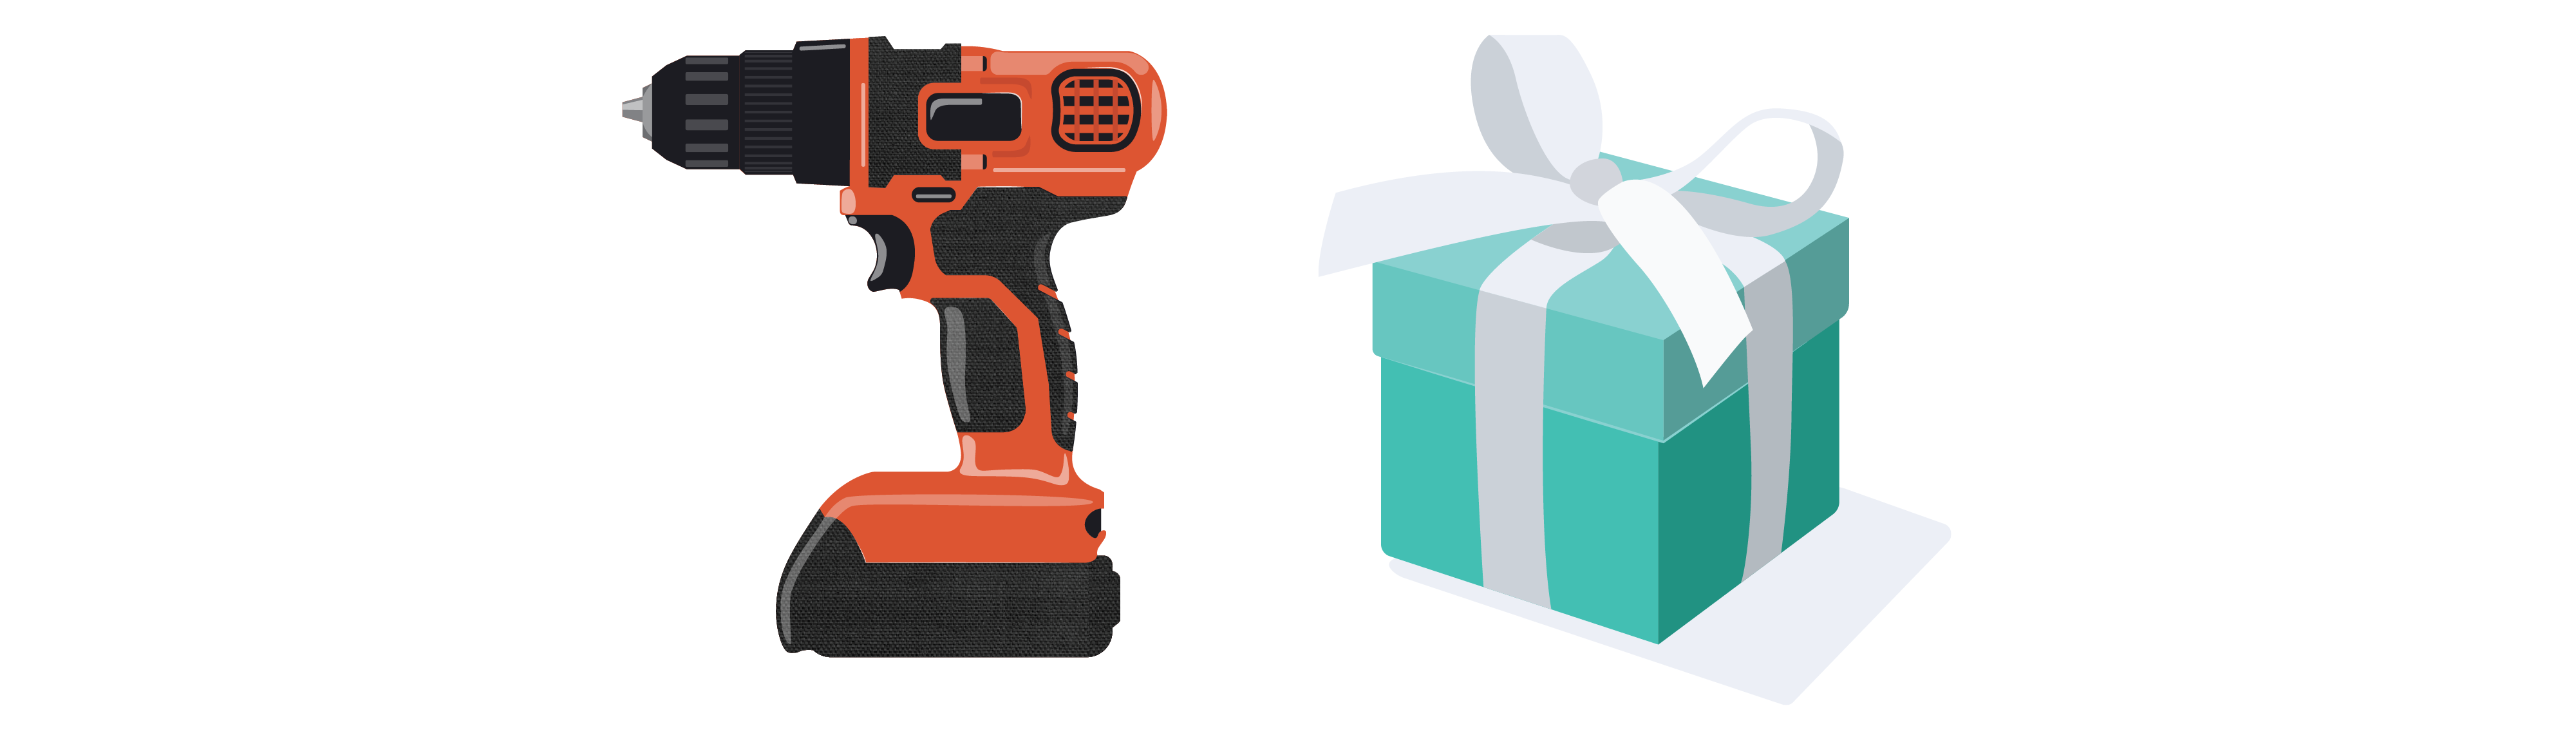 On the left, an orange and black standing battery-powered hand drill. On the right, a gift box wrapped with turquoise paper and a bow.